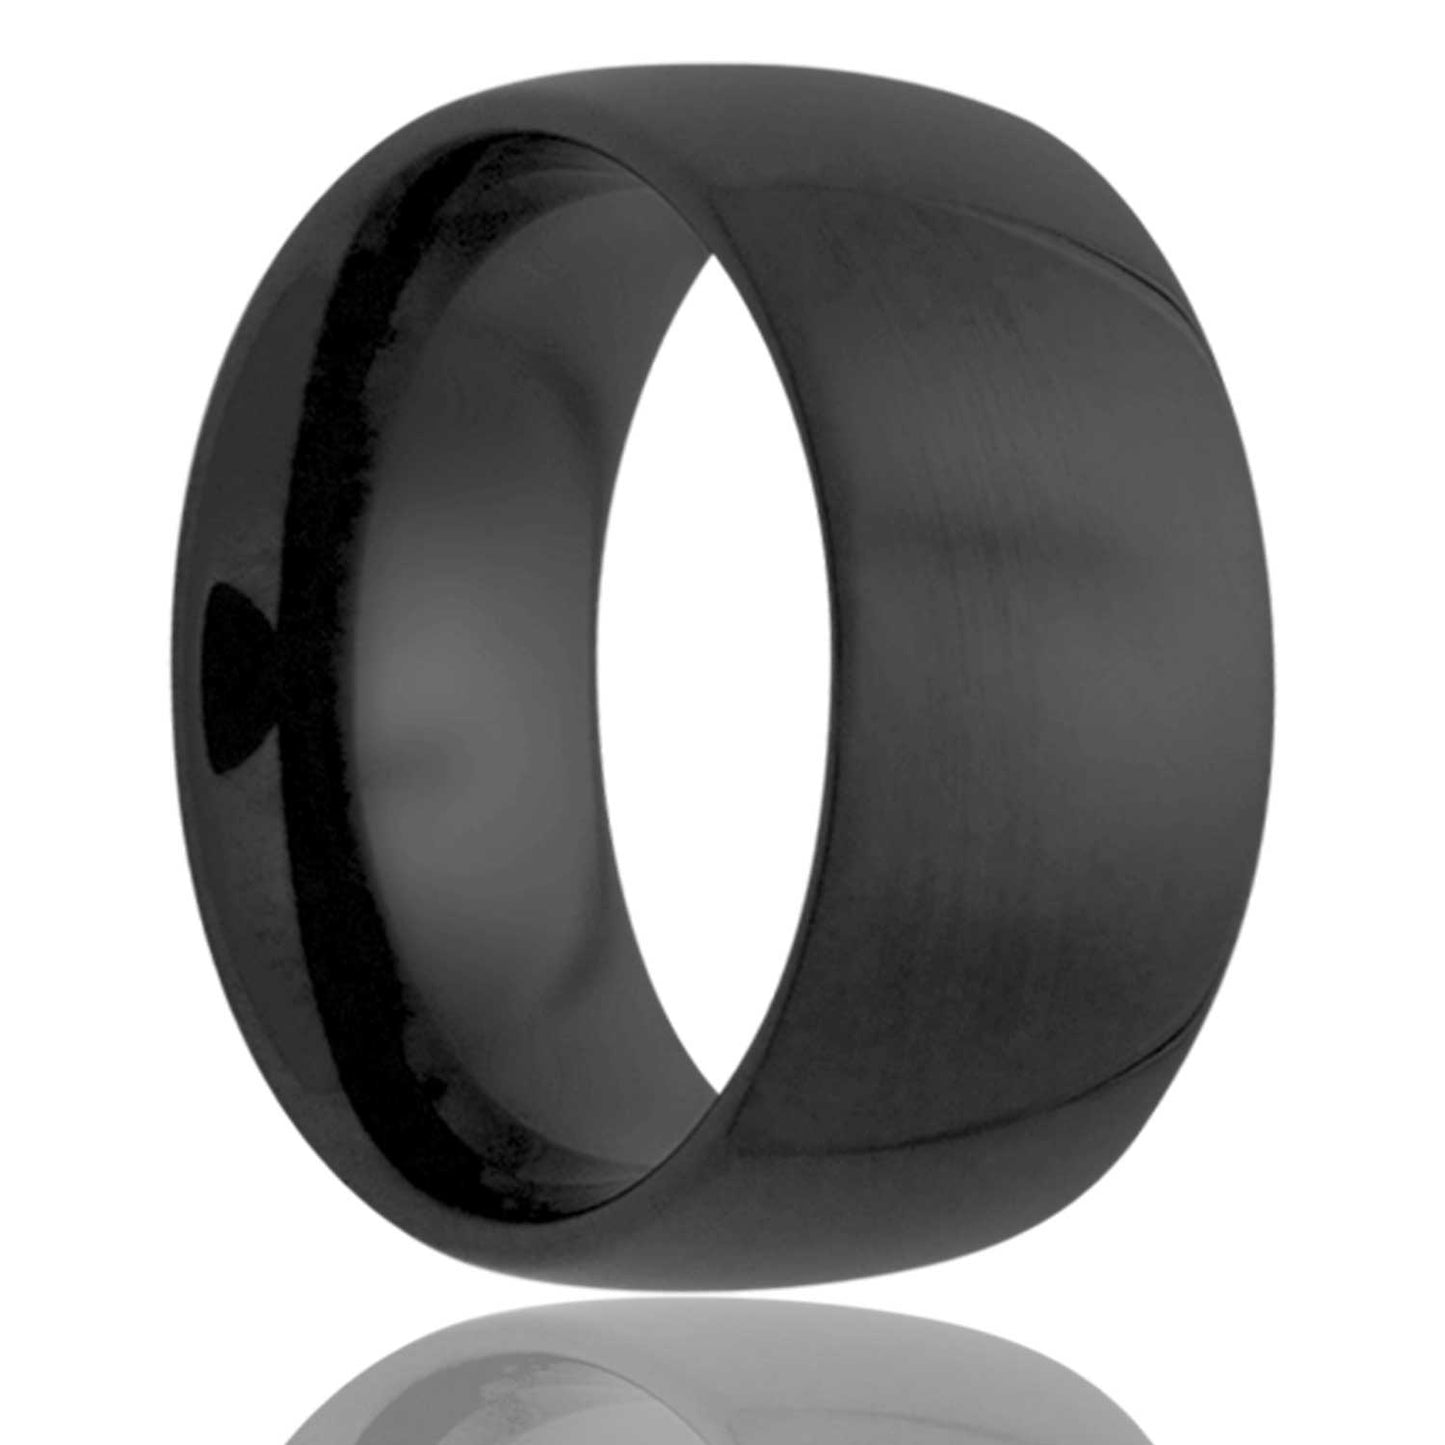 A domed black ceramic wedding band displayed on a neutral white background.